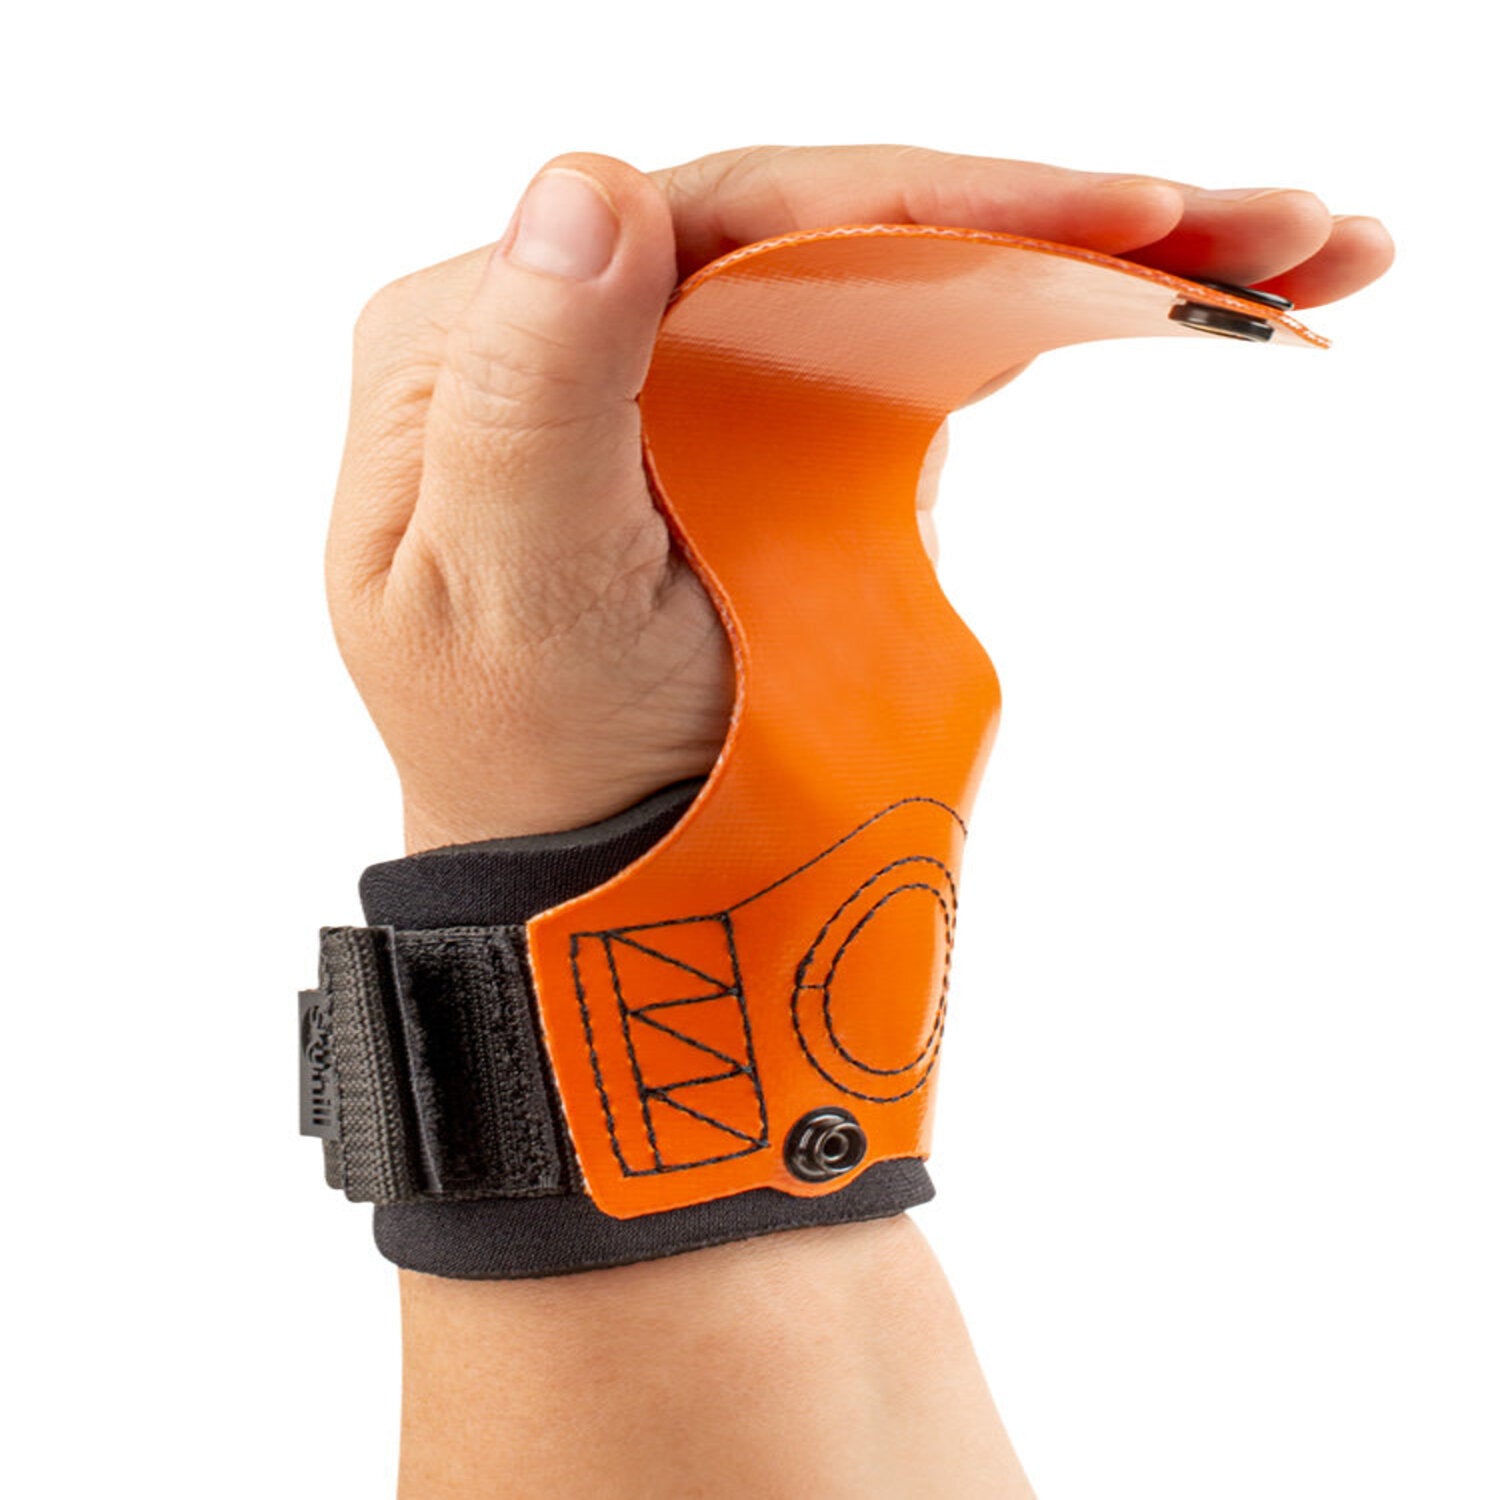 Skyhill Competition 2.0 Gymnastic Grips Orange